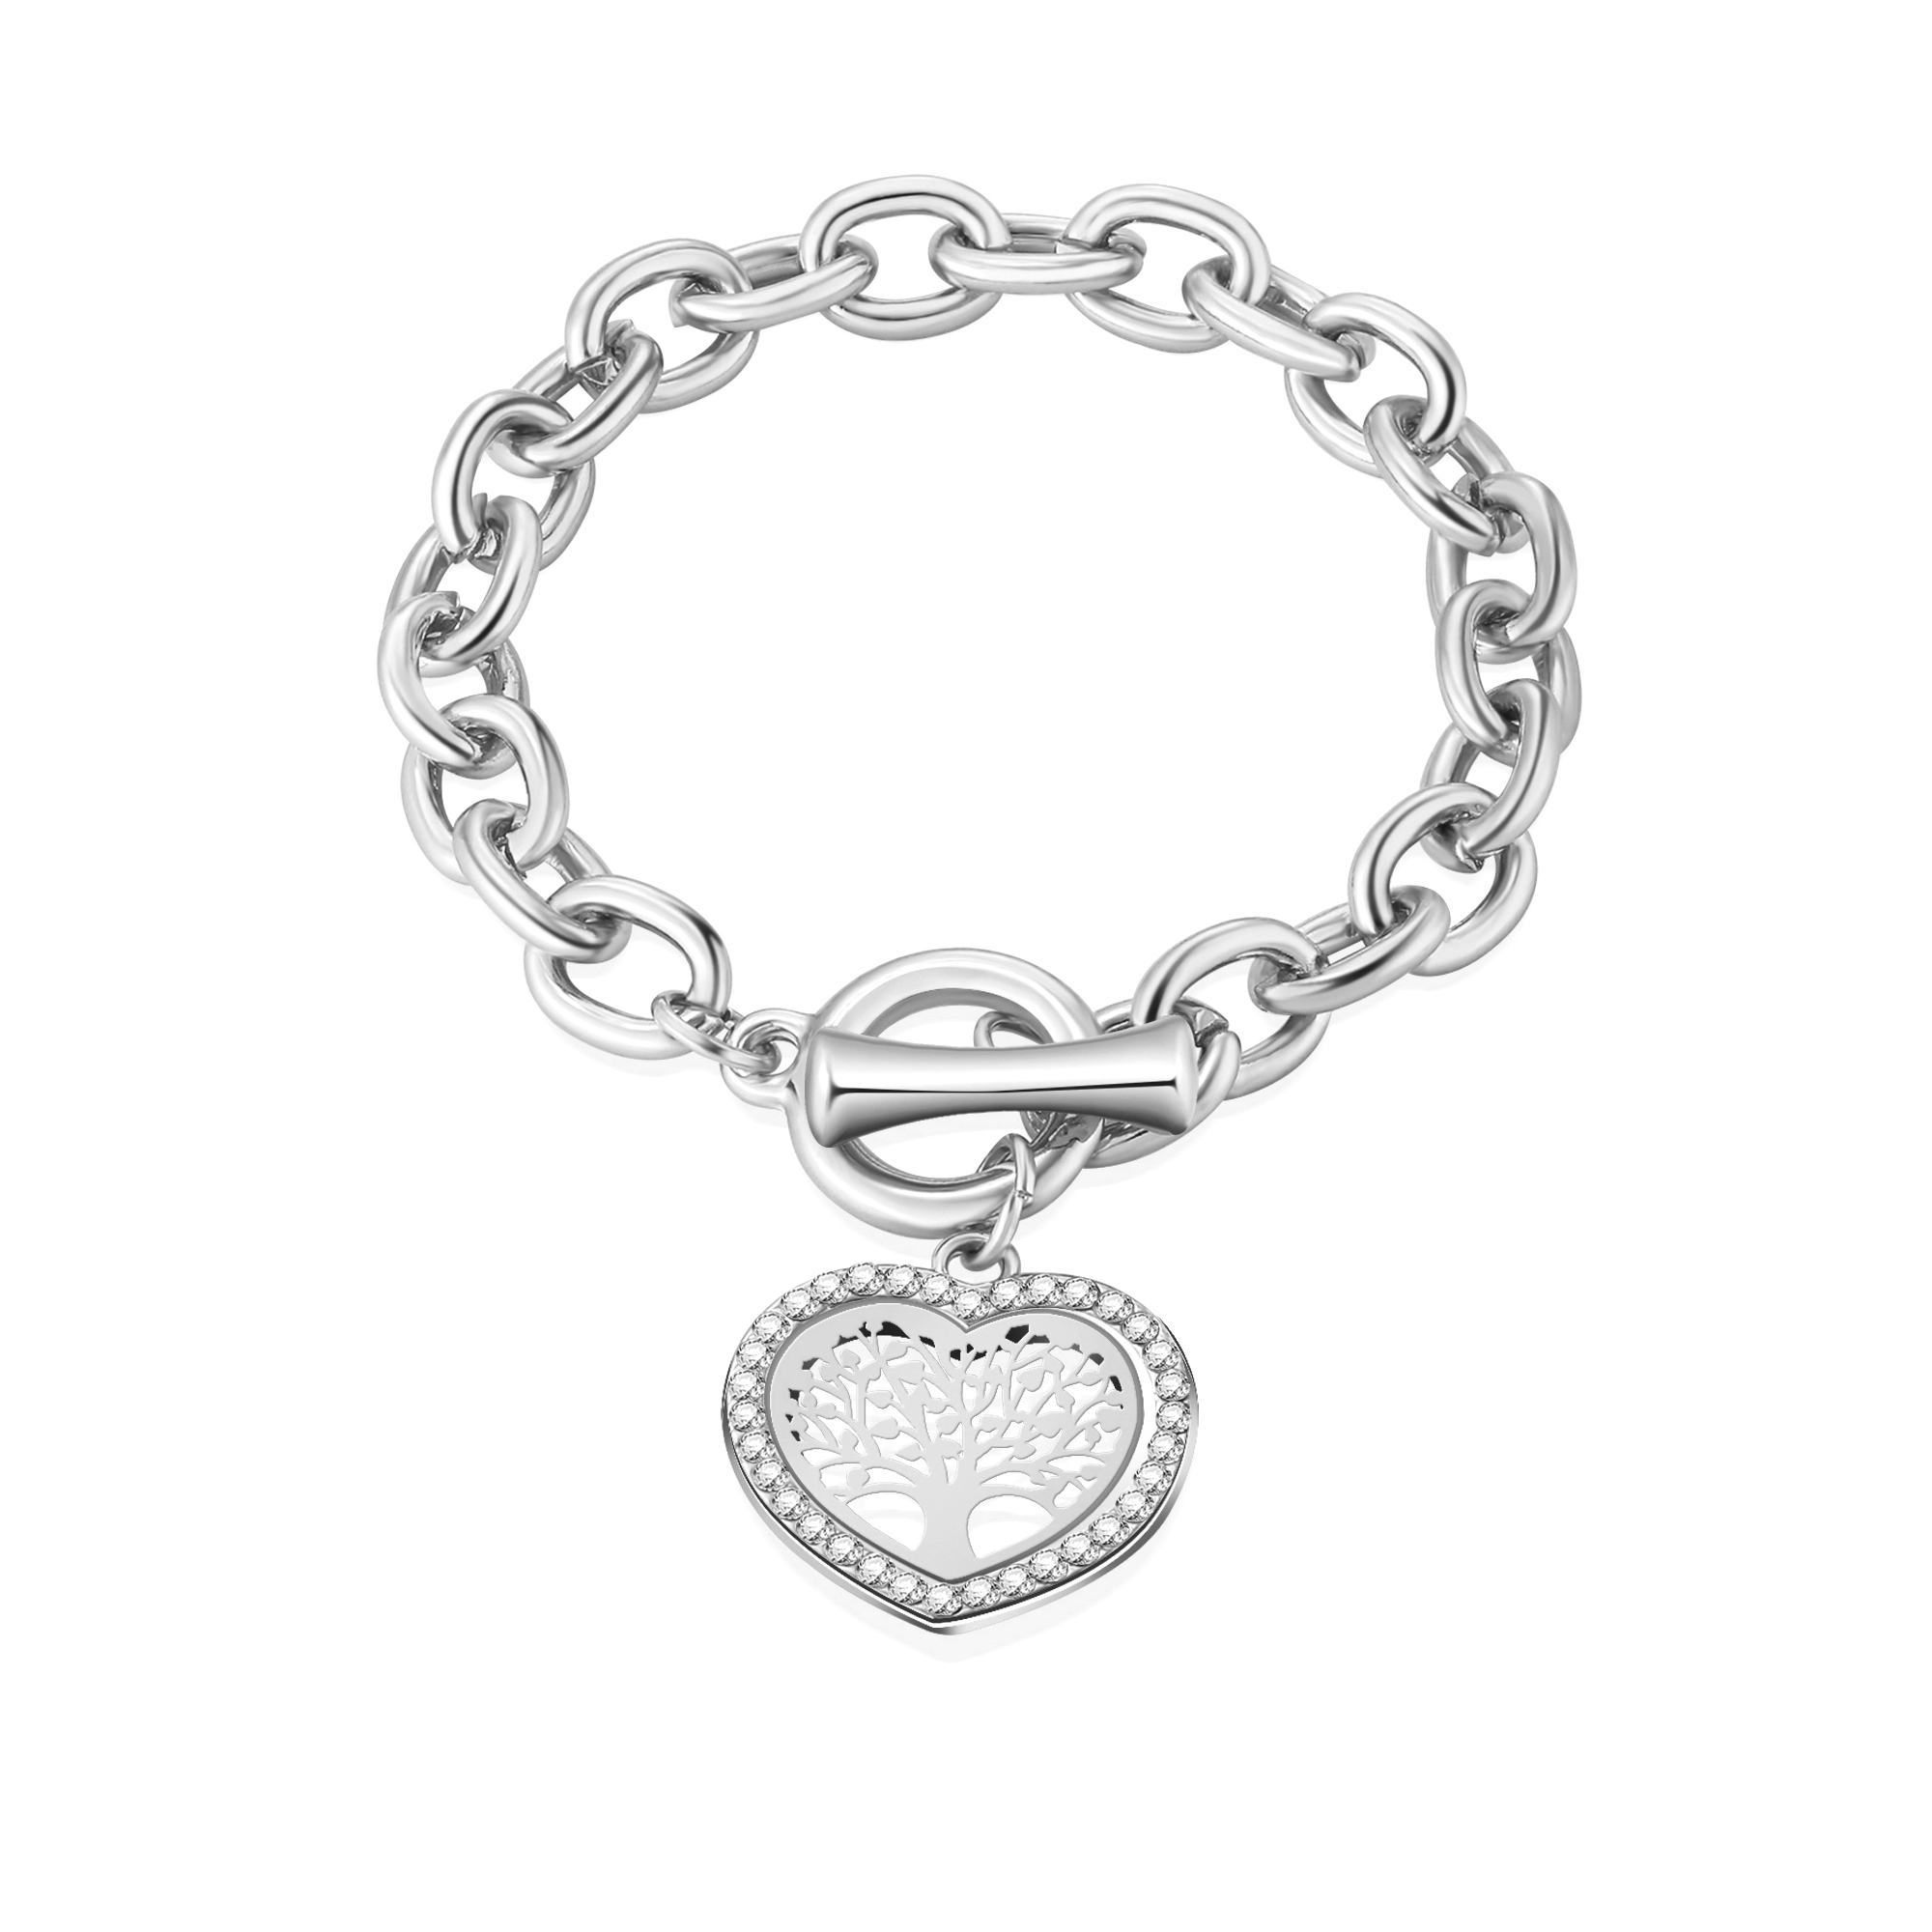 10pcs - Tree of life Heart Charm Zircon Crystals Bracelet in Colour Silver or Rose Gold - 2 Colours 5 Each |GCJ510-Silver/Rosegold|UK SELLER